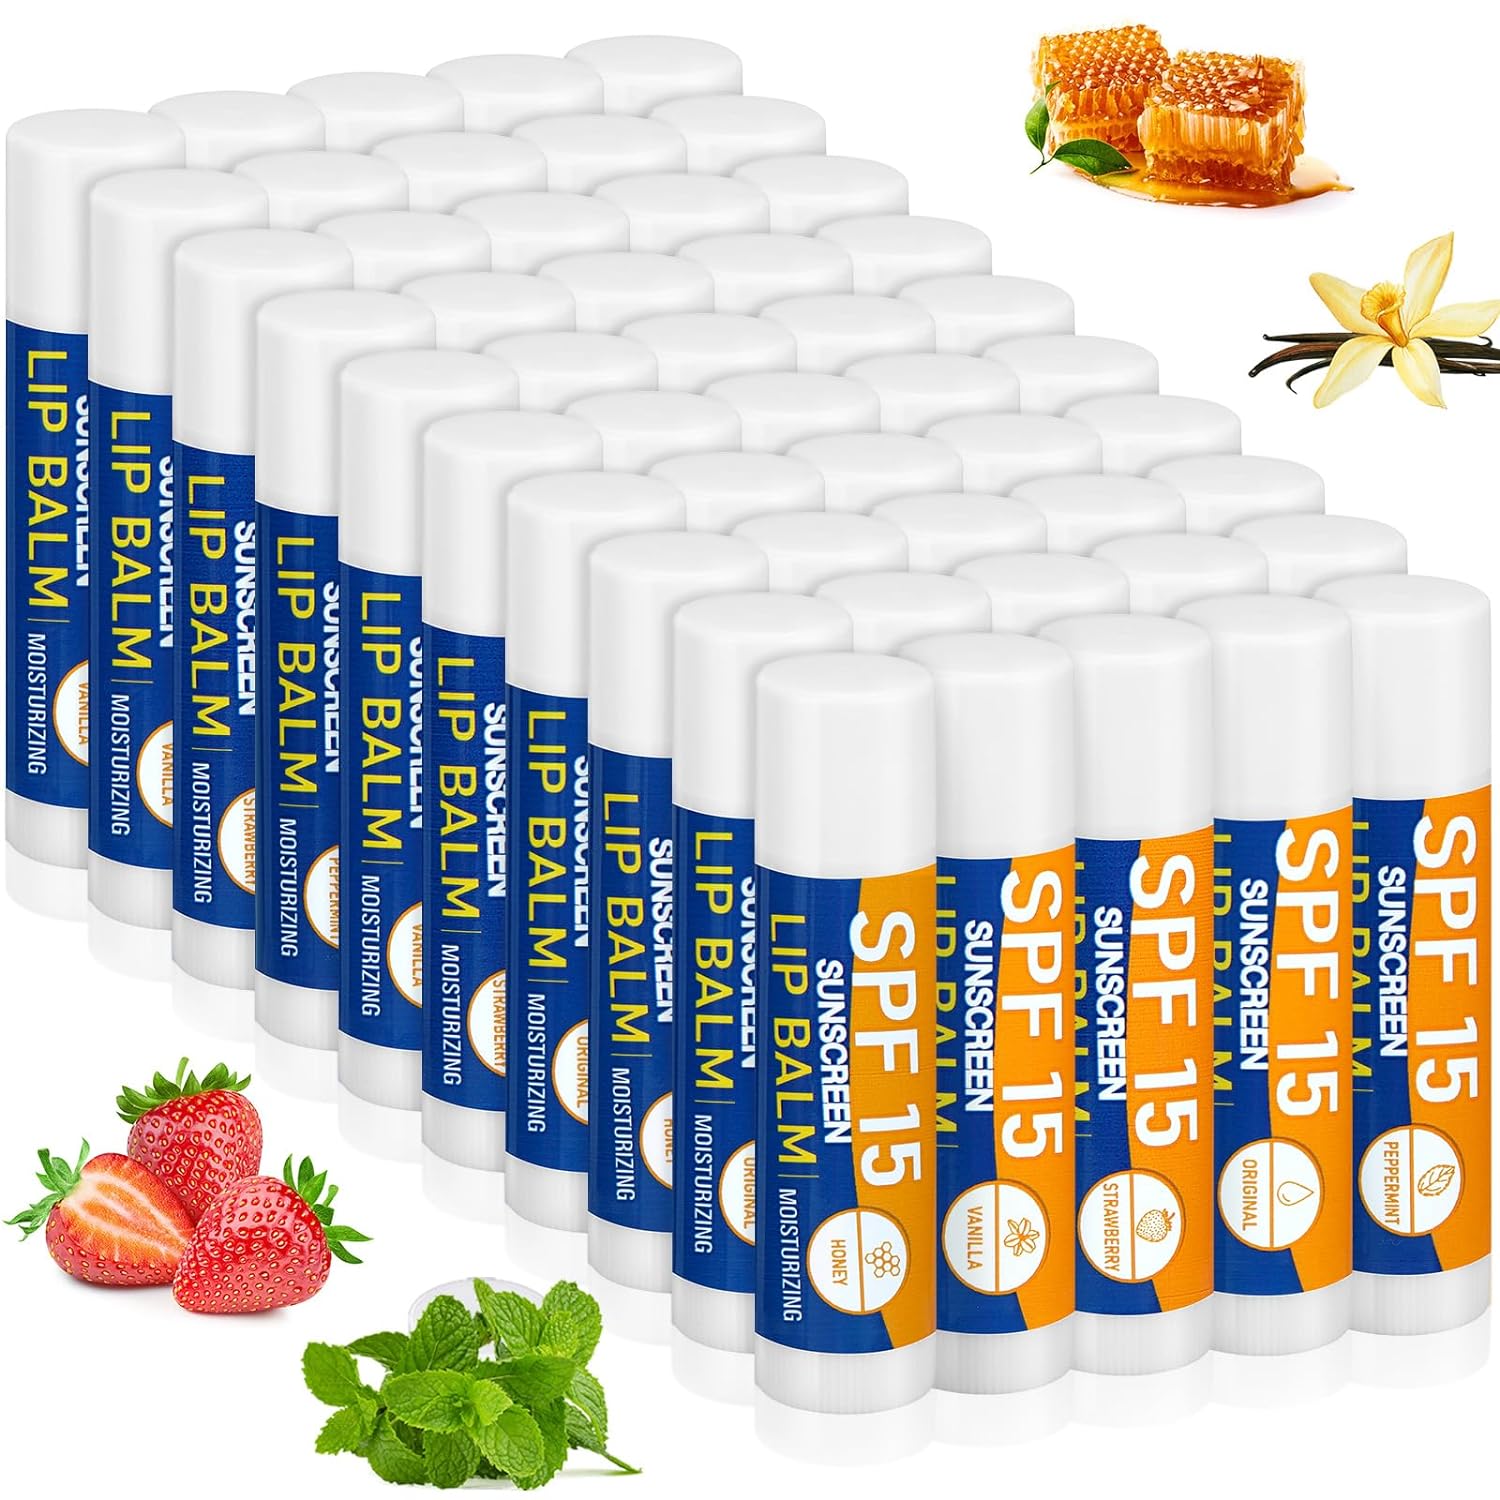 Lip Balms with Spf 15 Bulk Sunscreen Lip Balm Sticks Party Gifts Favors Lip Sun Protection 5 Flavors for Wedding Bridal Baby Shower Favors Outdoor Travel Beach(50 Pcs)